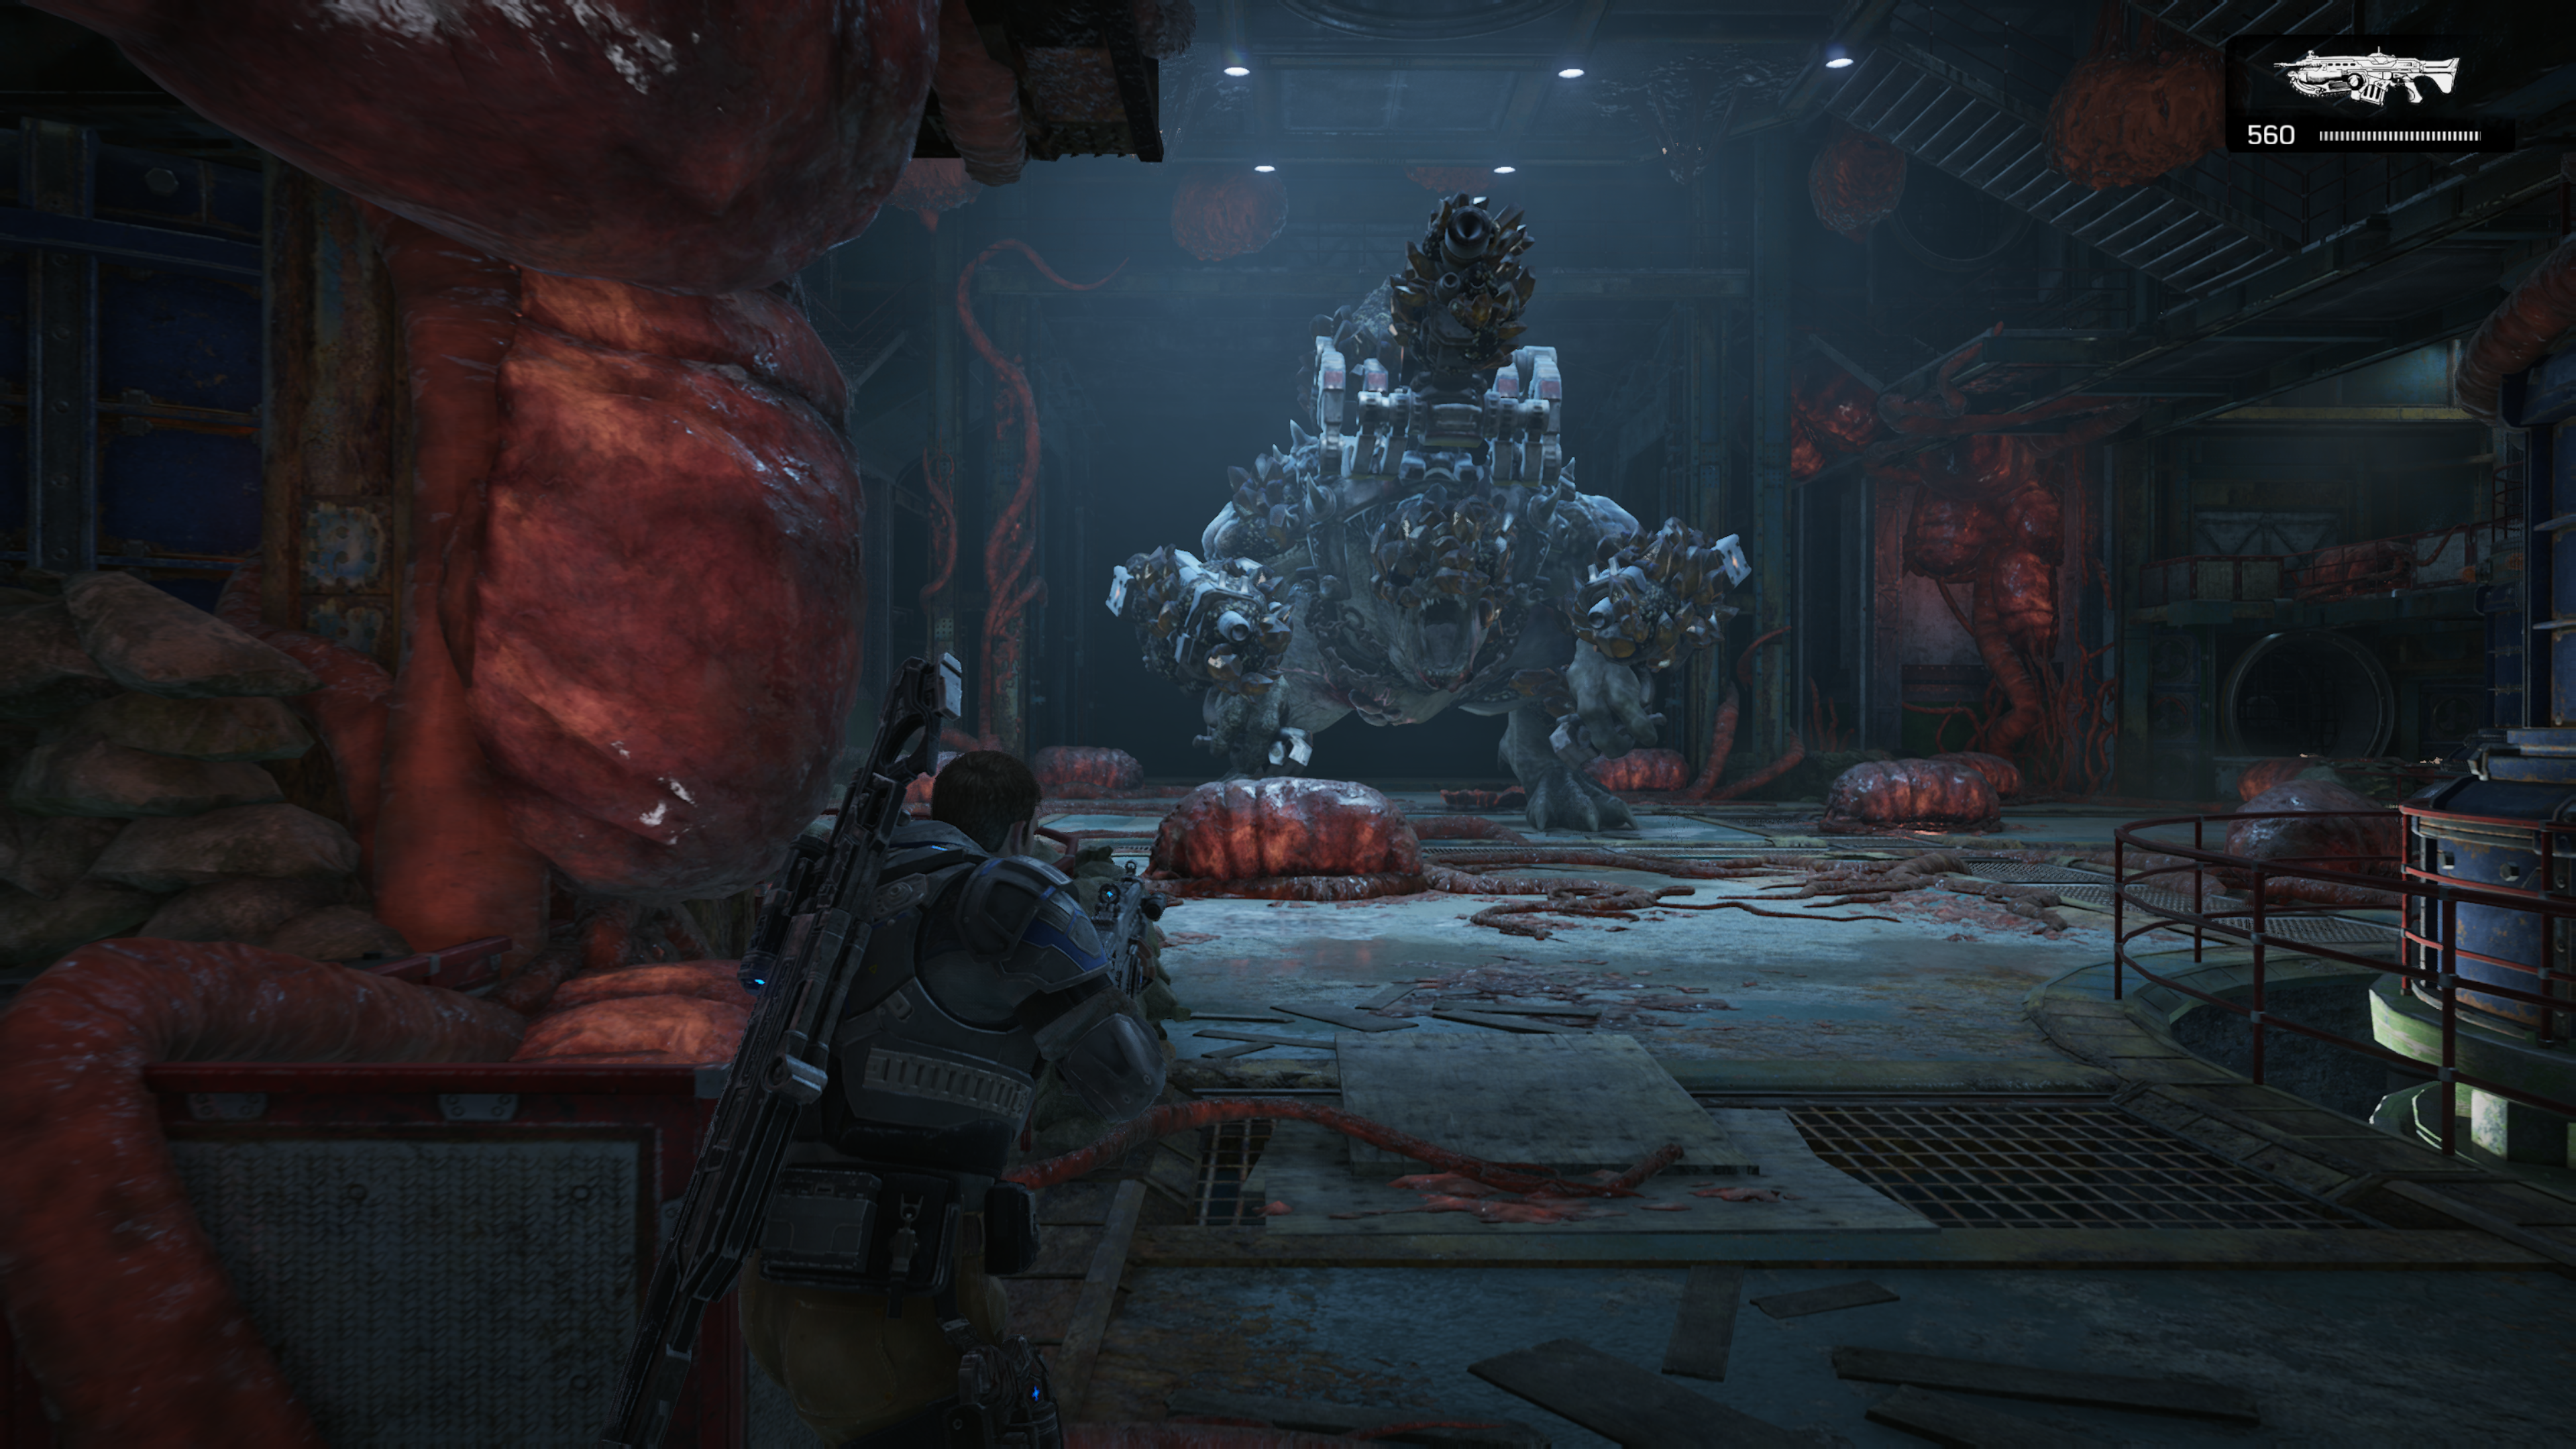 Gears of War 4 review – Great, but not the best in series